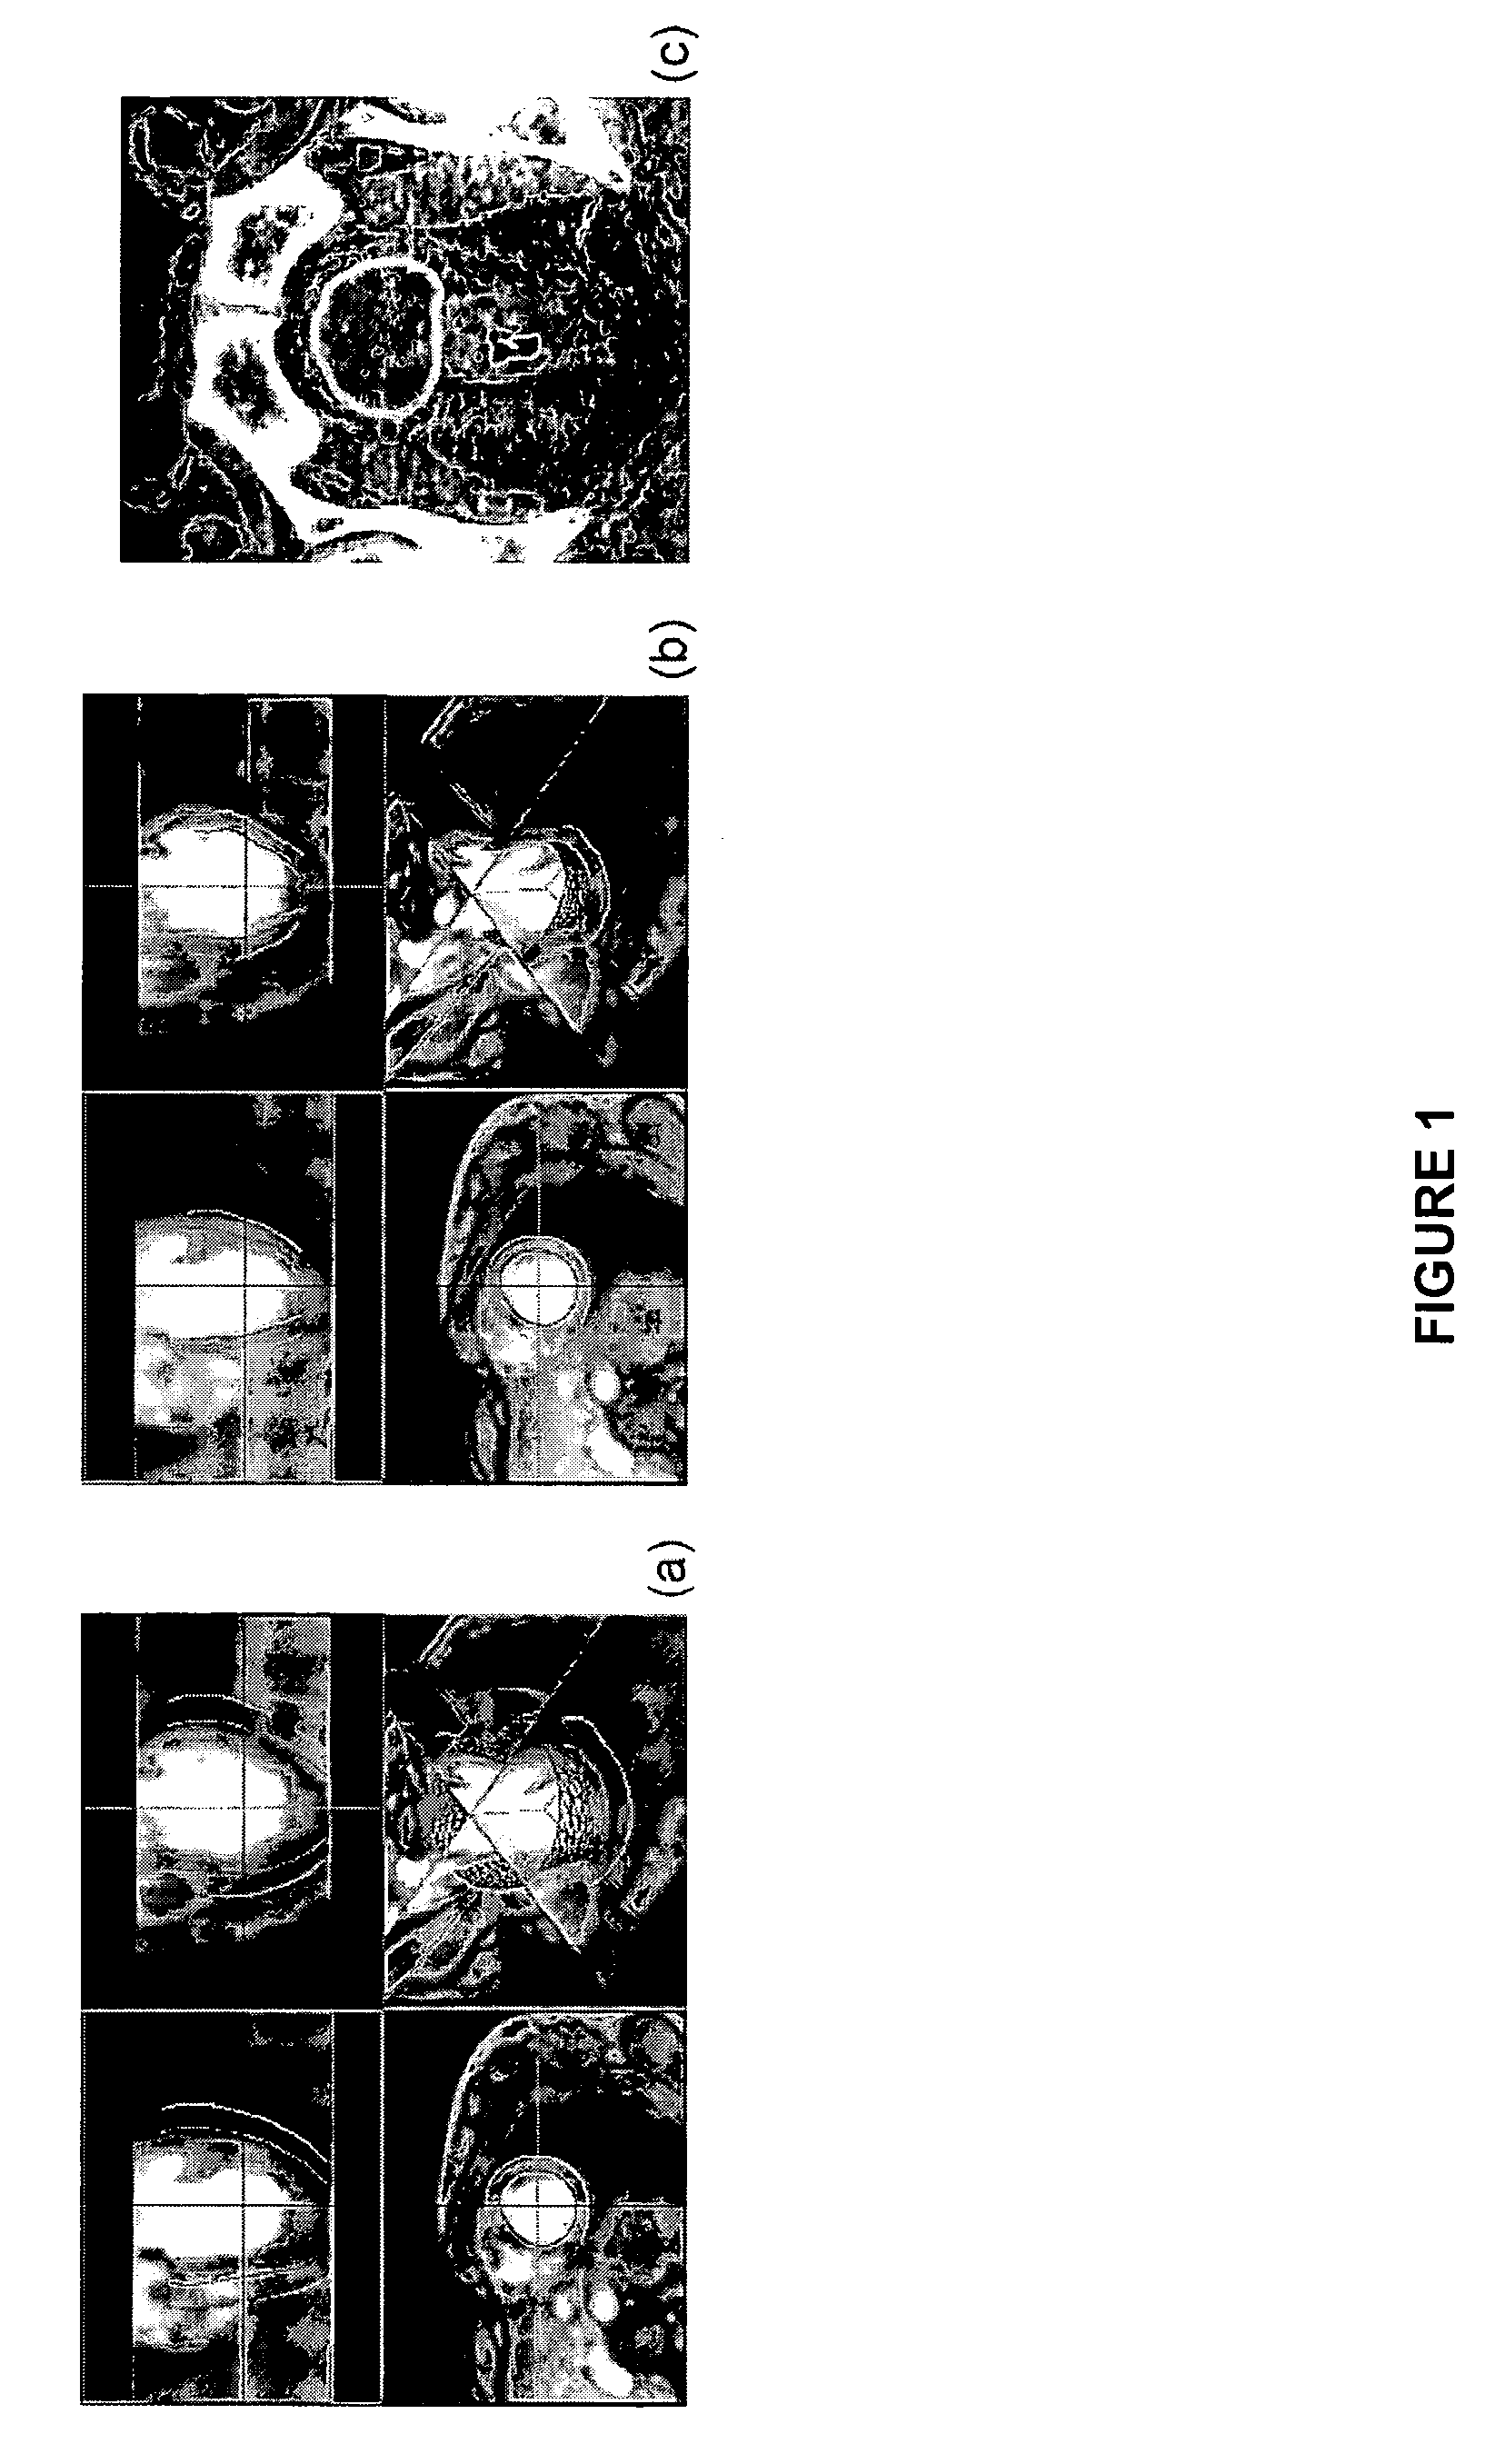 System and methods for image segmentation in n-dimensional space